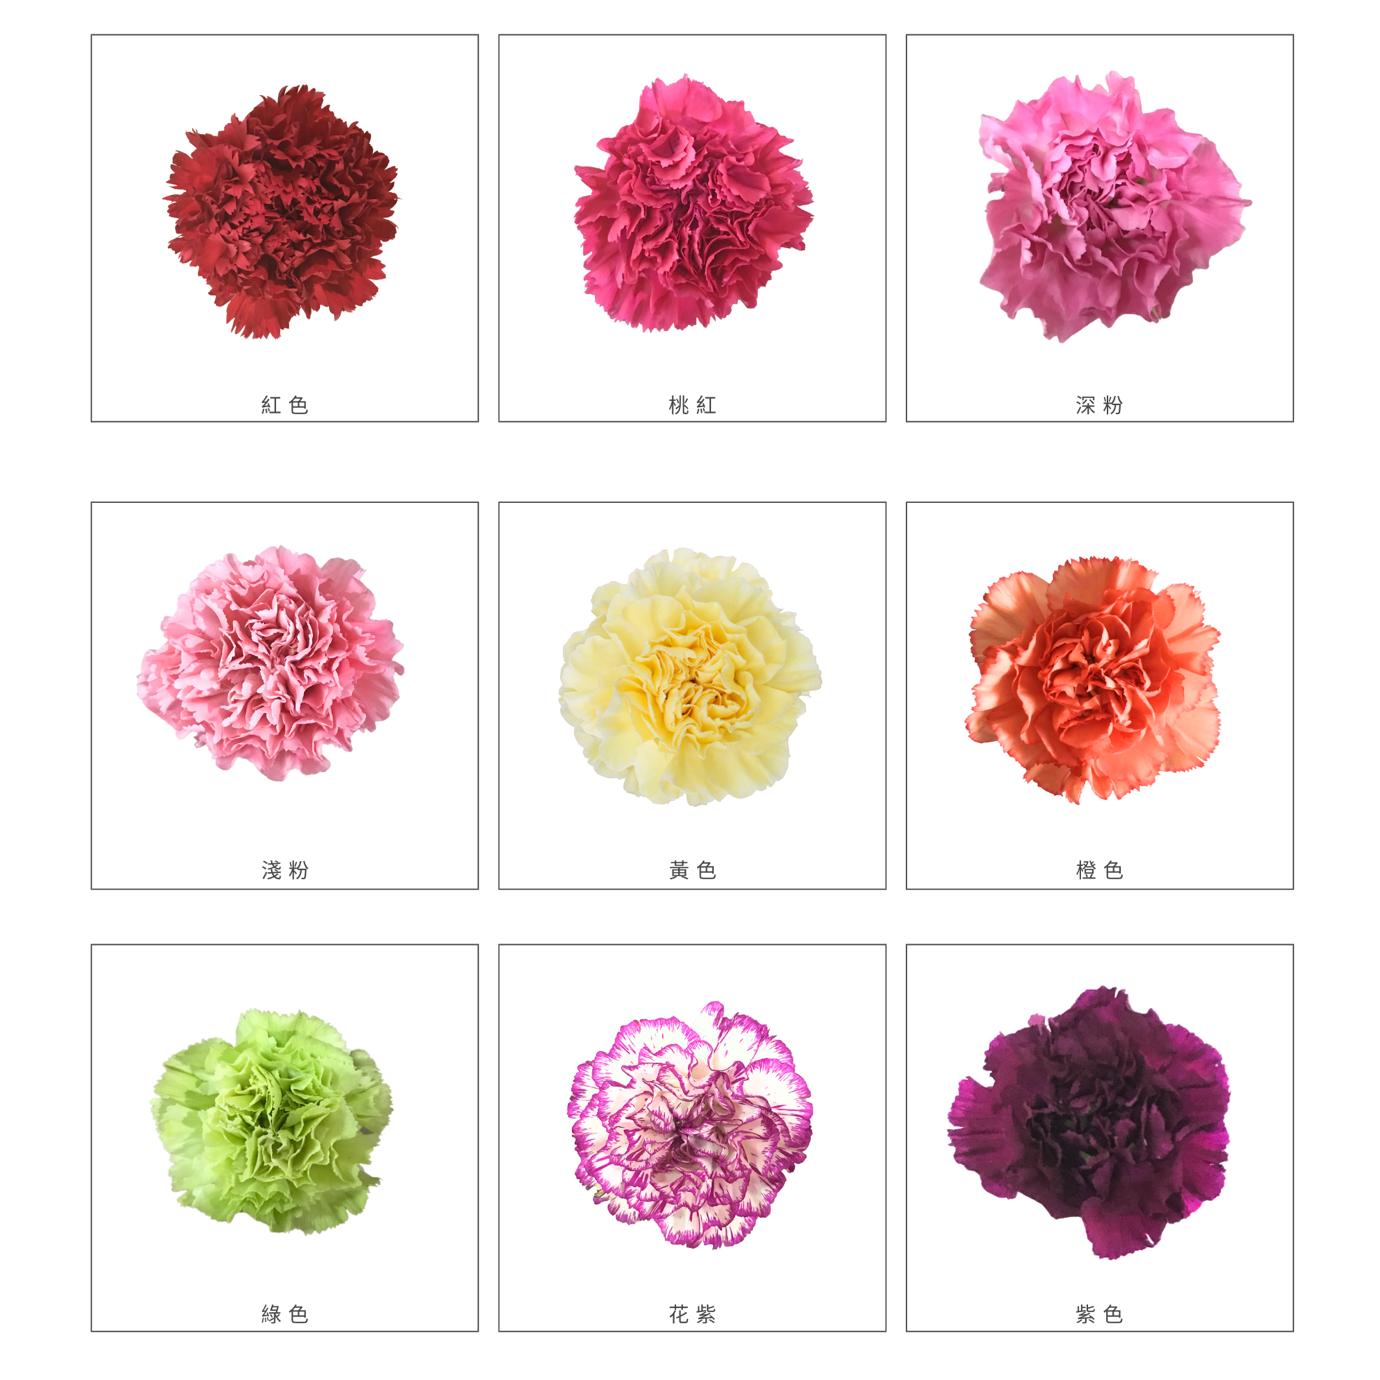 A collage of different colored flowers

Description automatically generated with low confidence